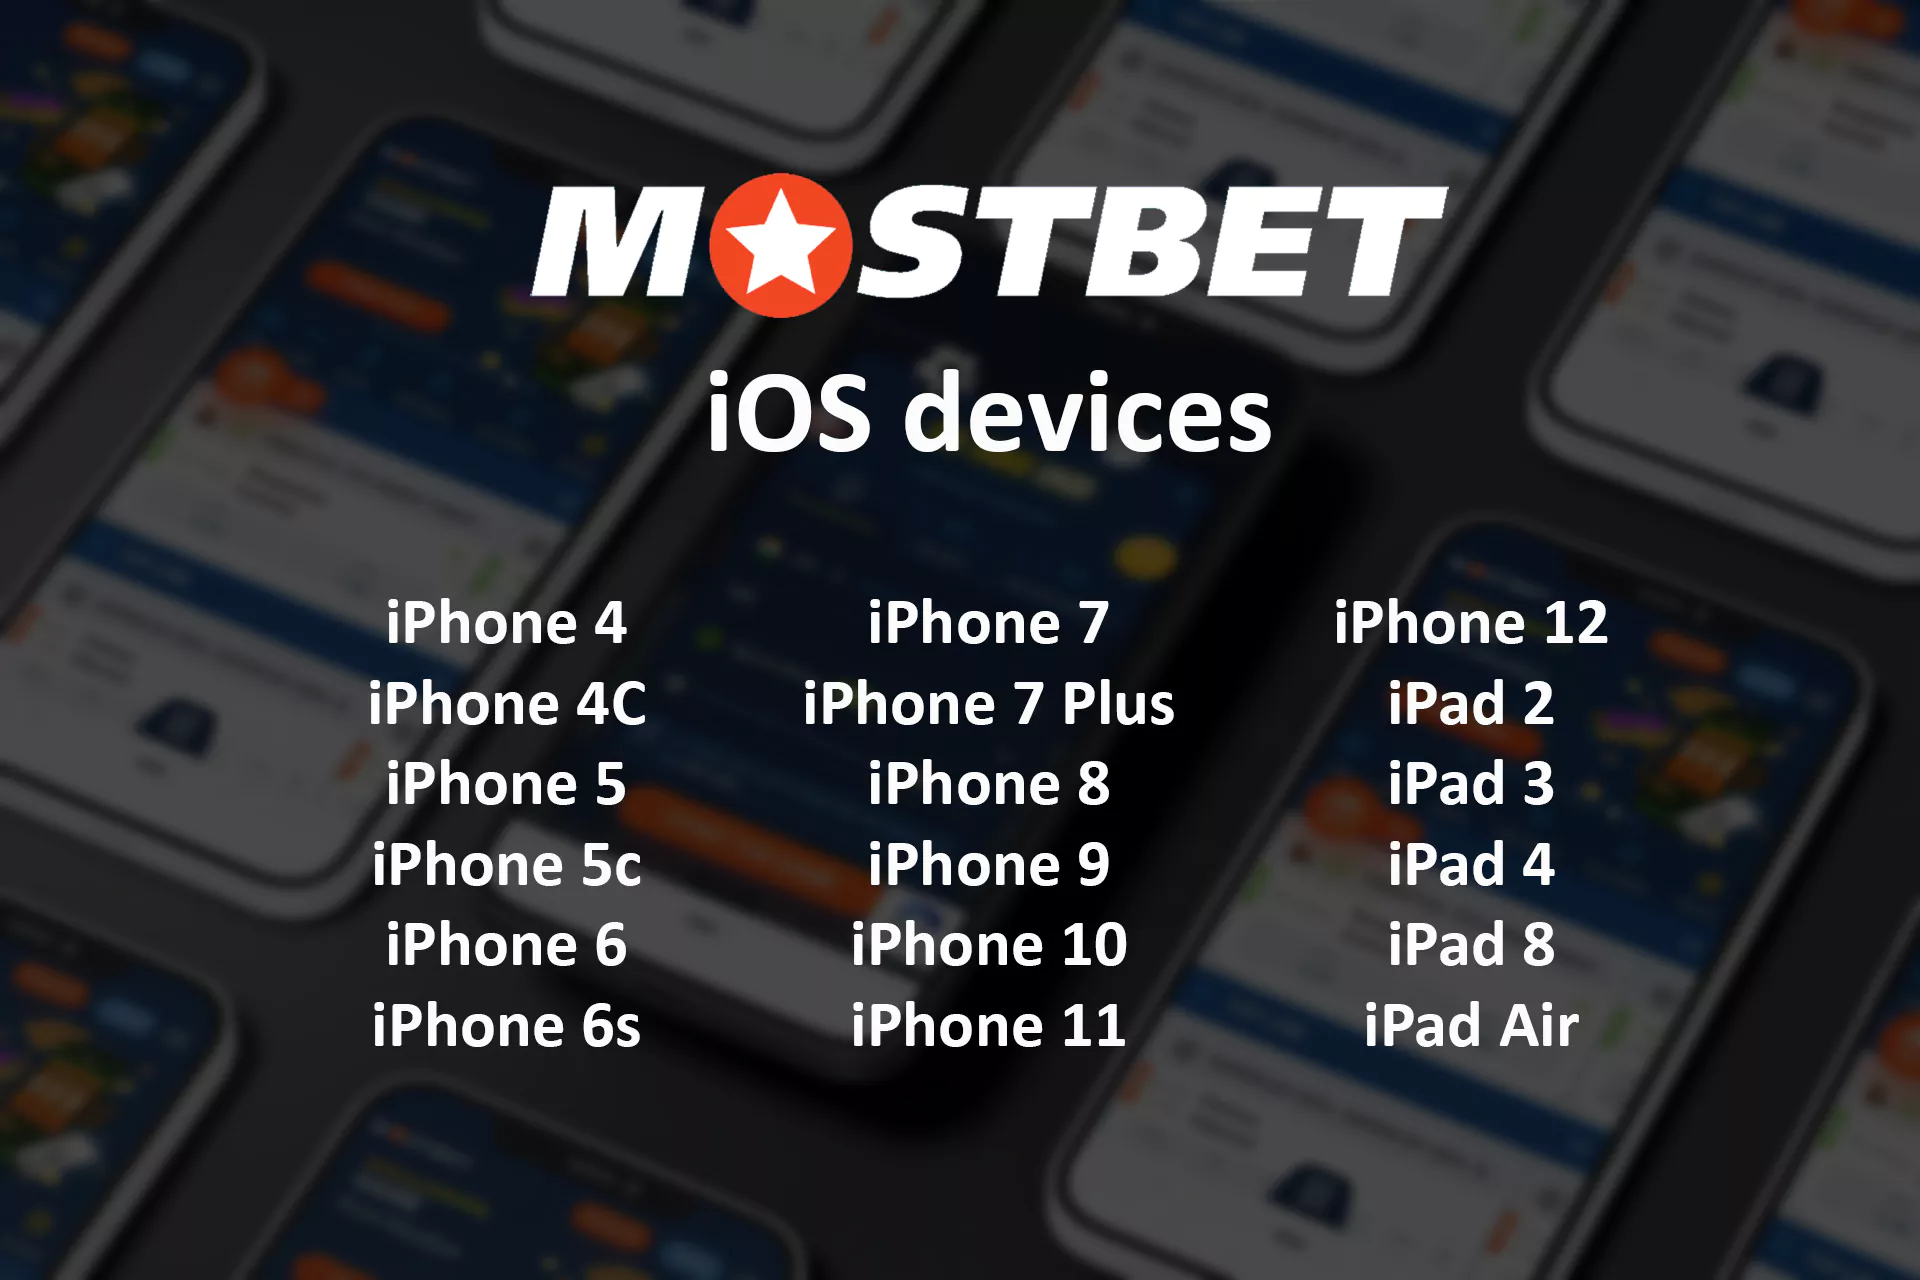 The Mostbet app is supported by all iOS devices.